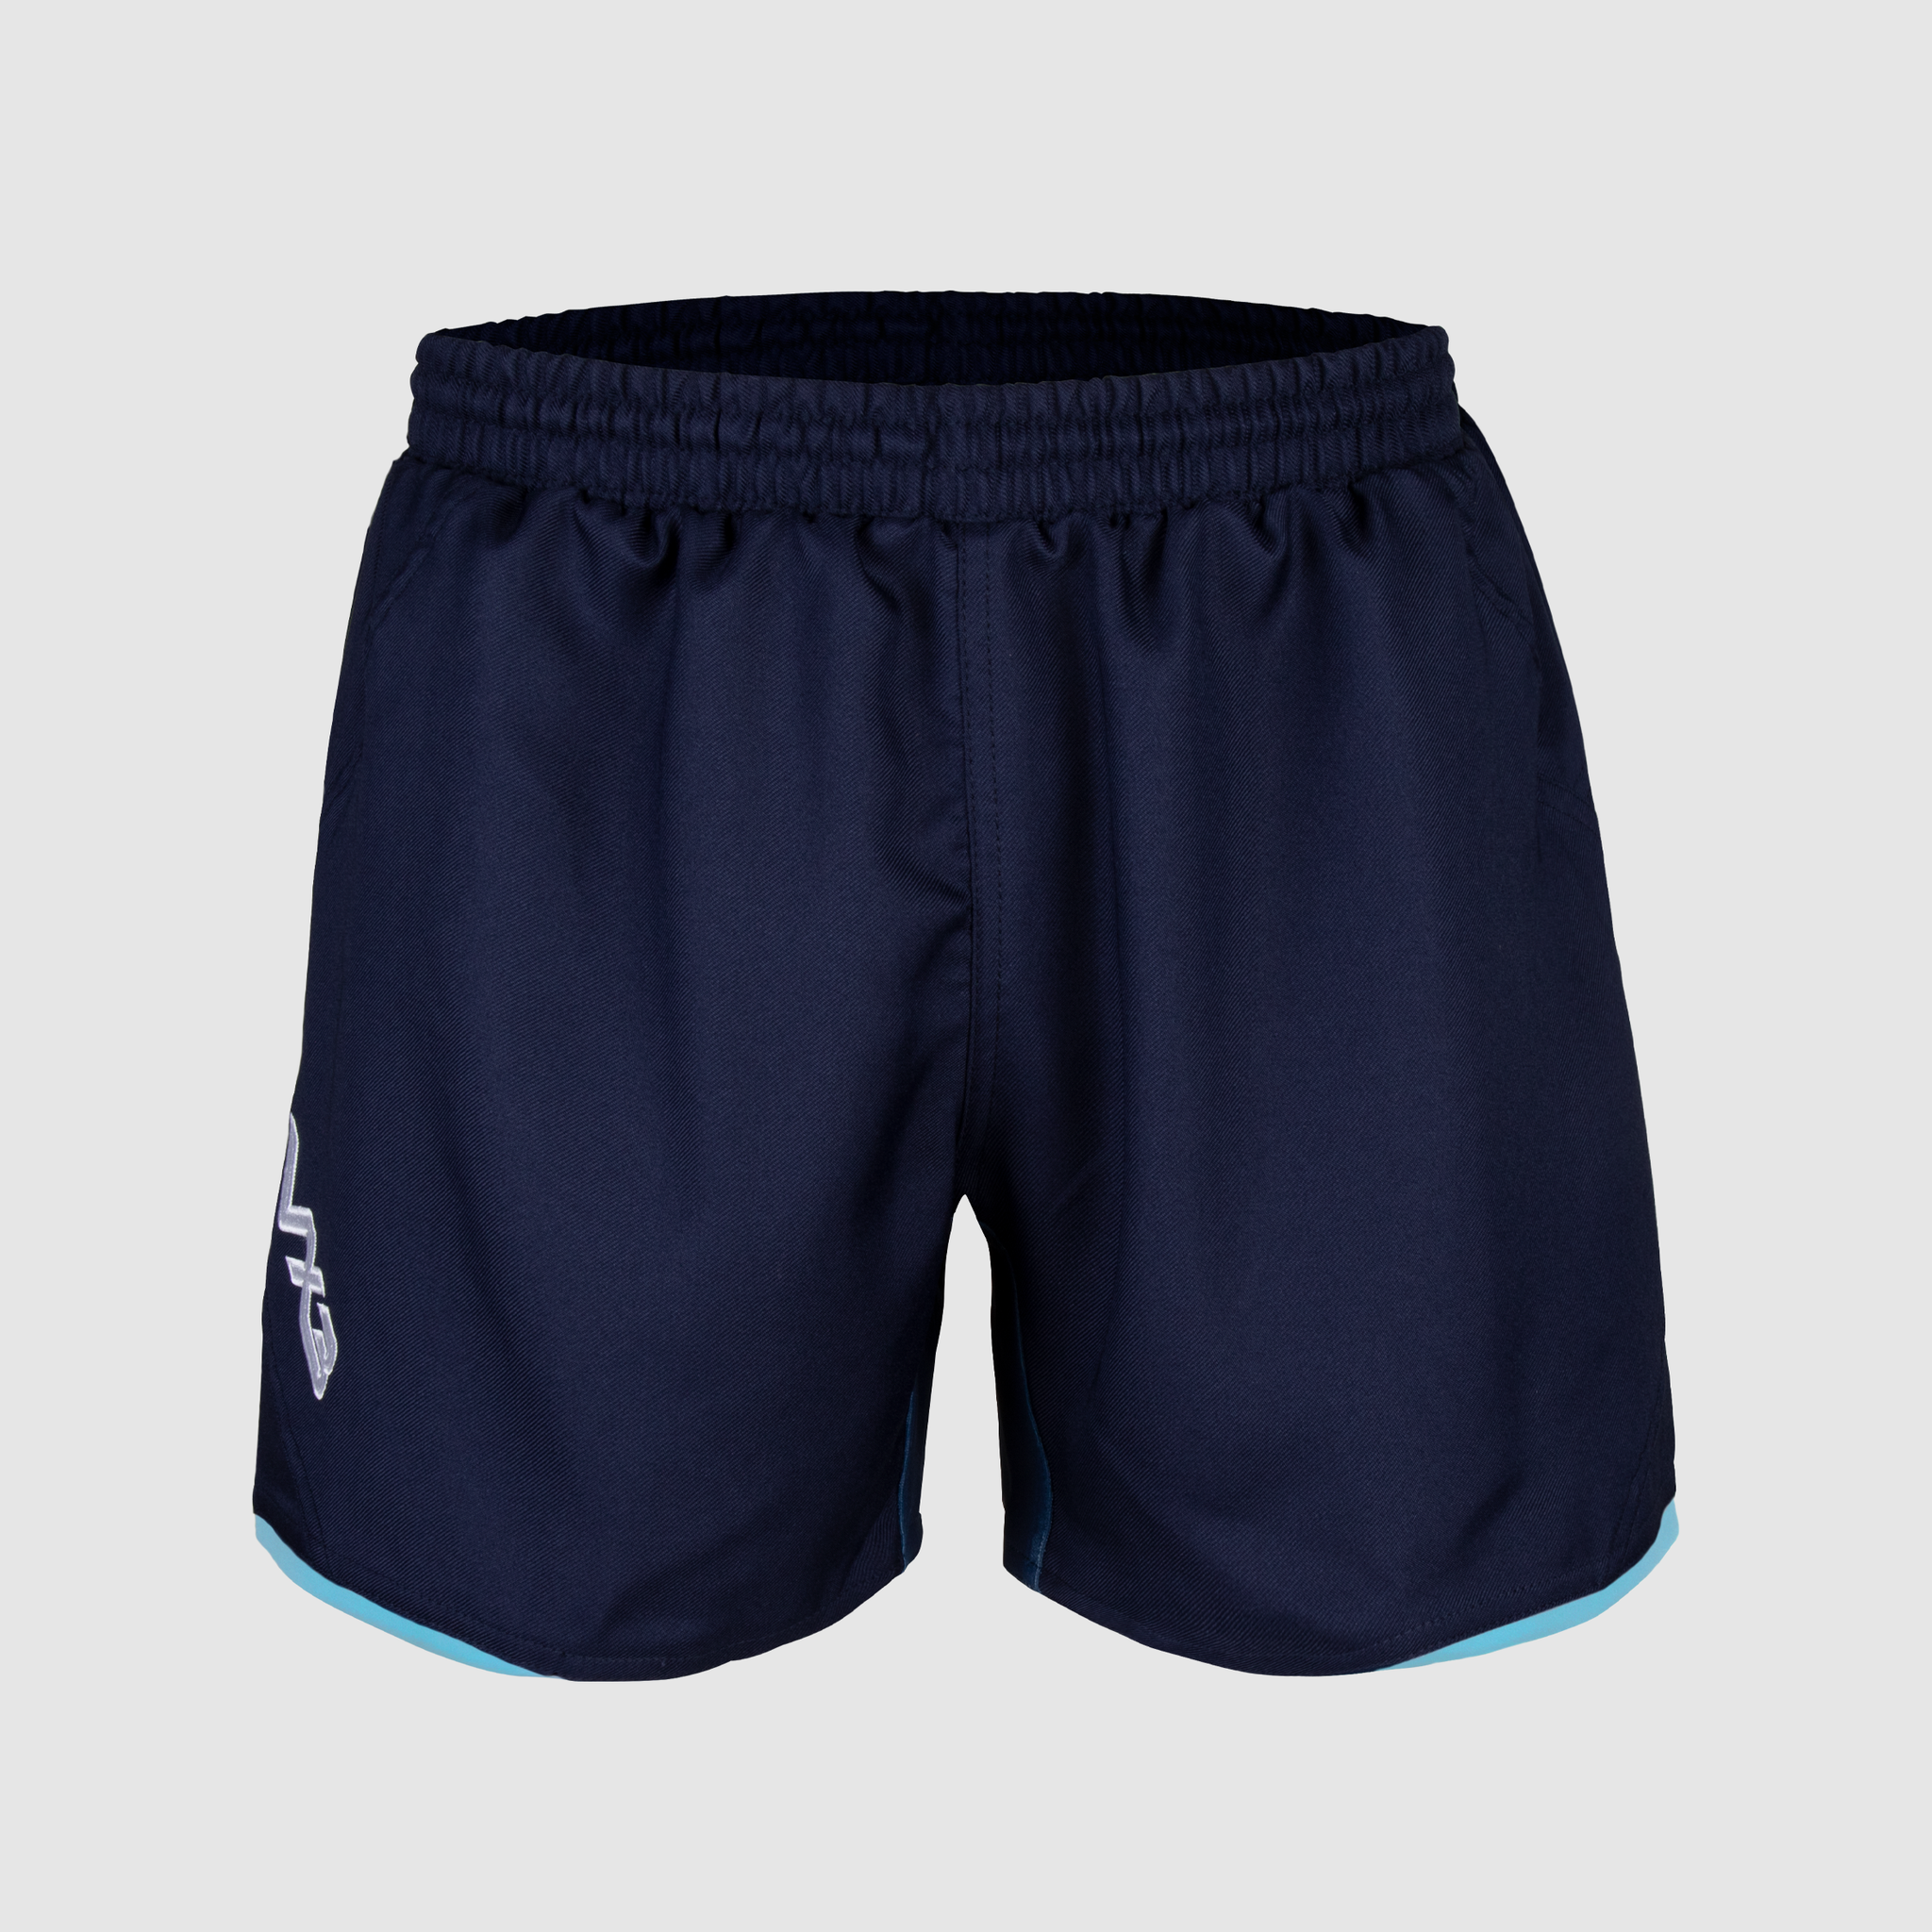 Prima Rugby Shorts Navy/Sky